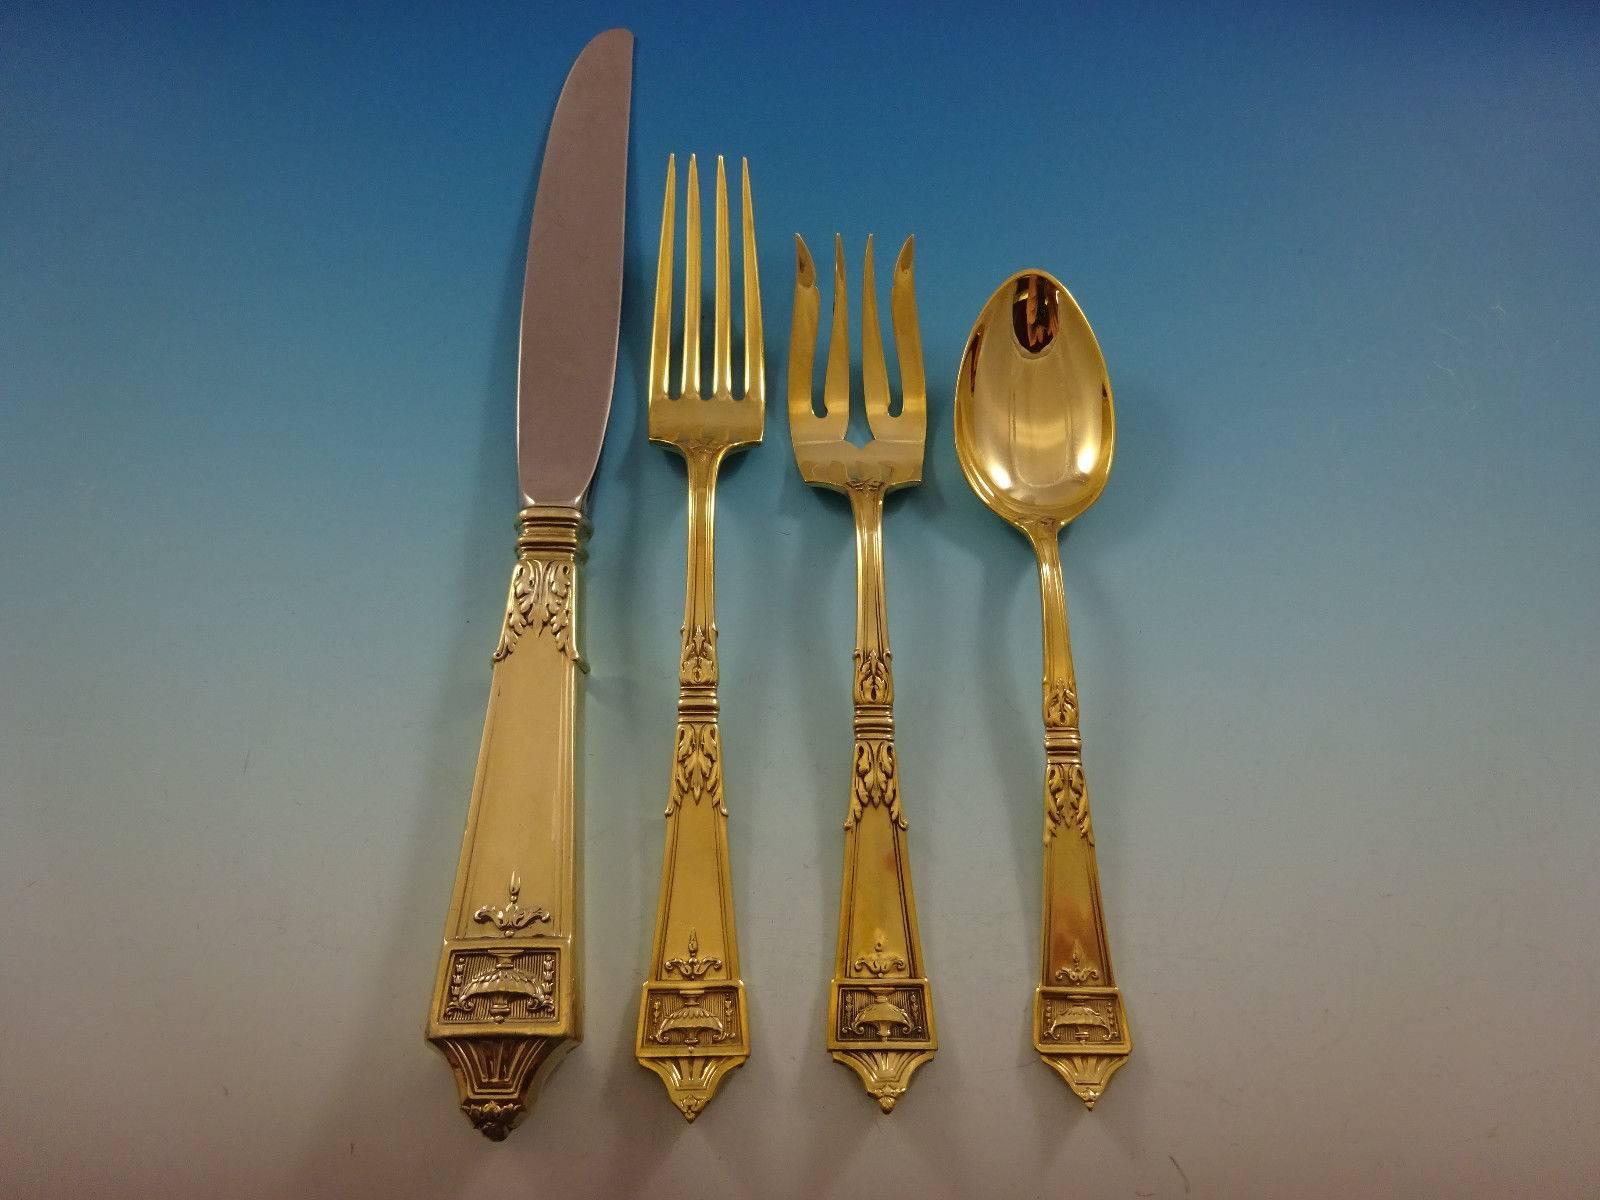 Add some luxe to your life with this fabulous Lansdowne Gold by Gorham Sterling silver flatware set of 32 pieces. Gold flatware is on trend and makes a bold statement on your table.

This set is vermeil (completely gold-washed) and includes:
 
Eight